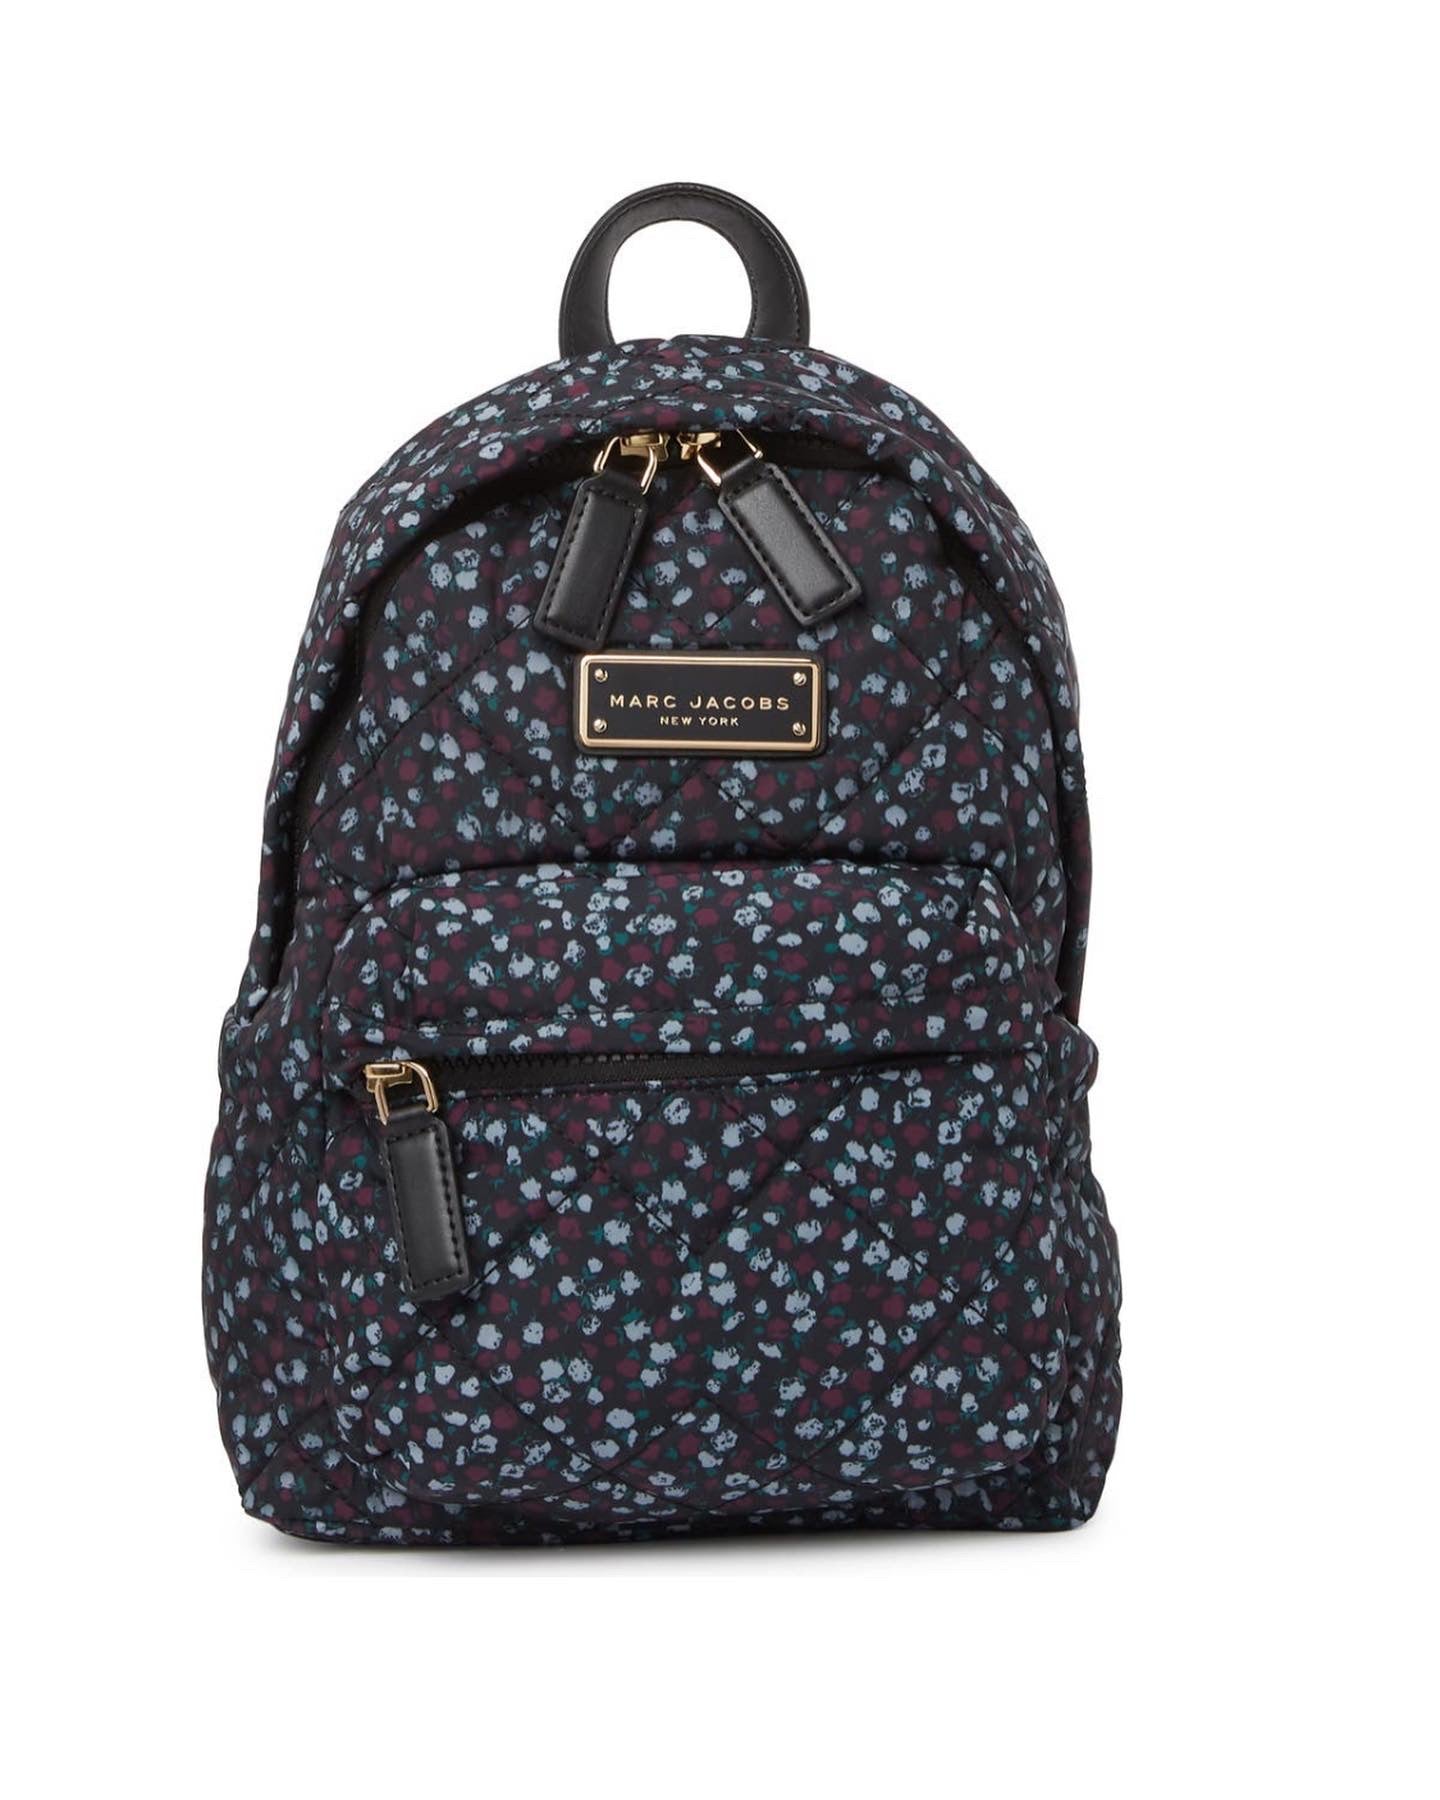 Marc Jacobs Quilted Nylon Printed Mini Backpack, Blue Mirage Multi